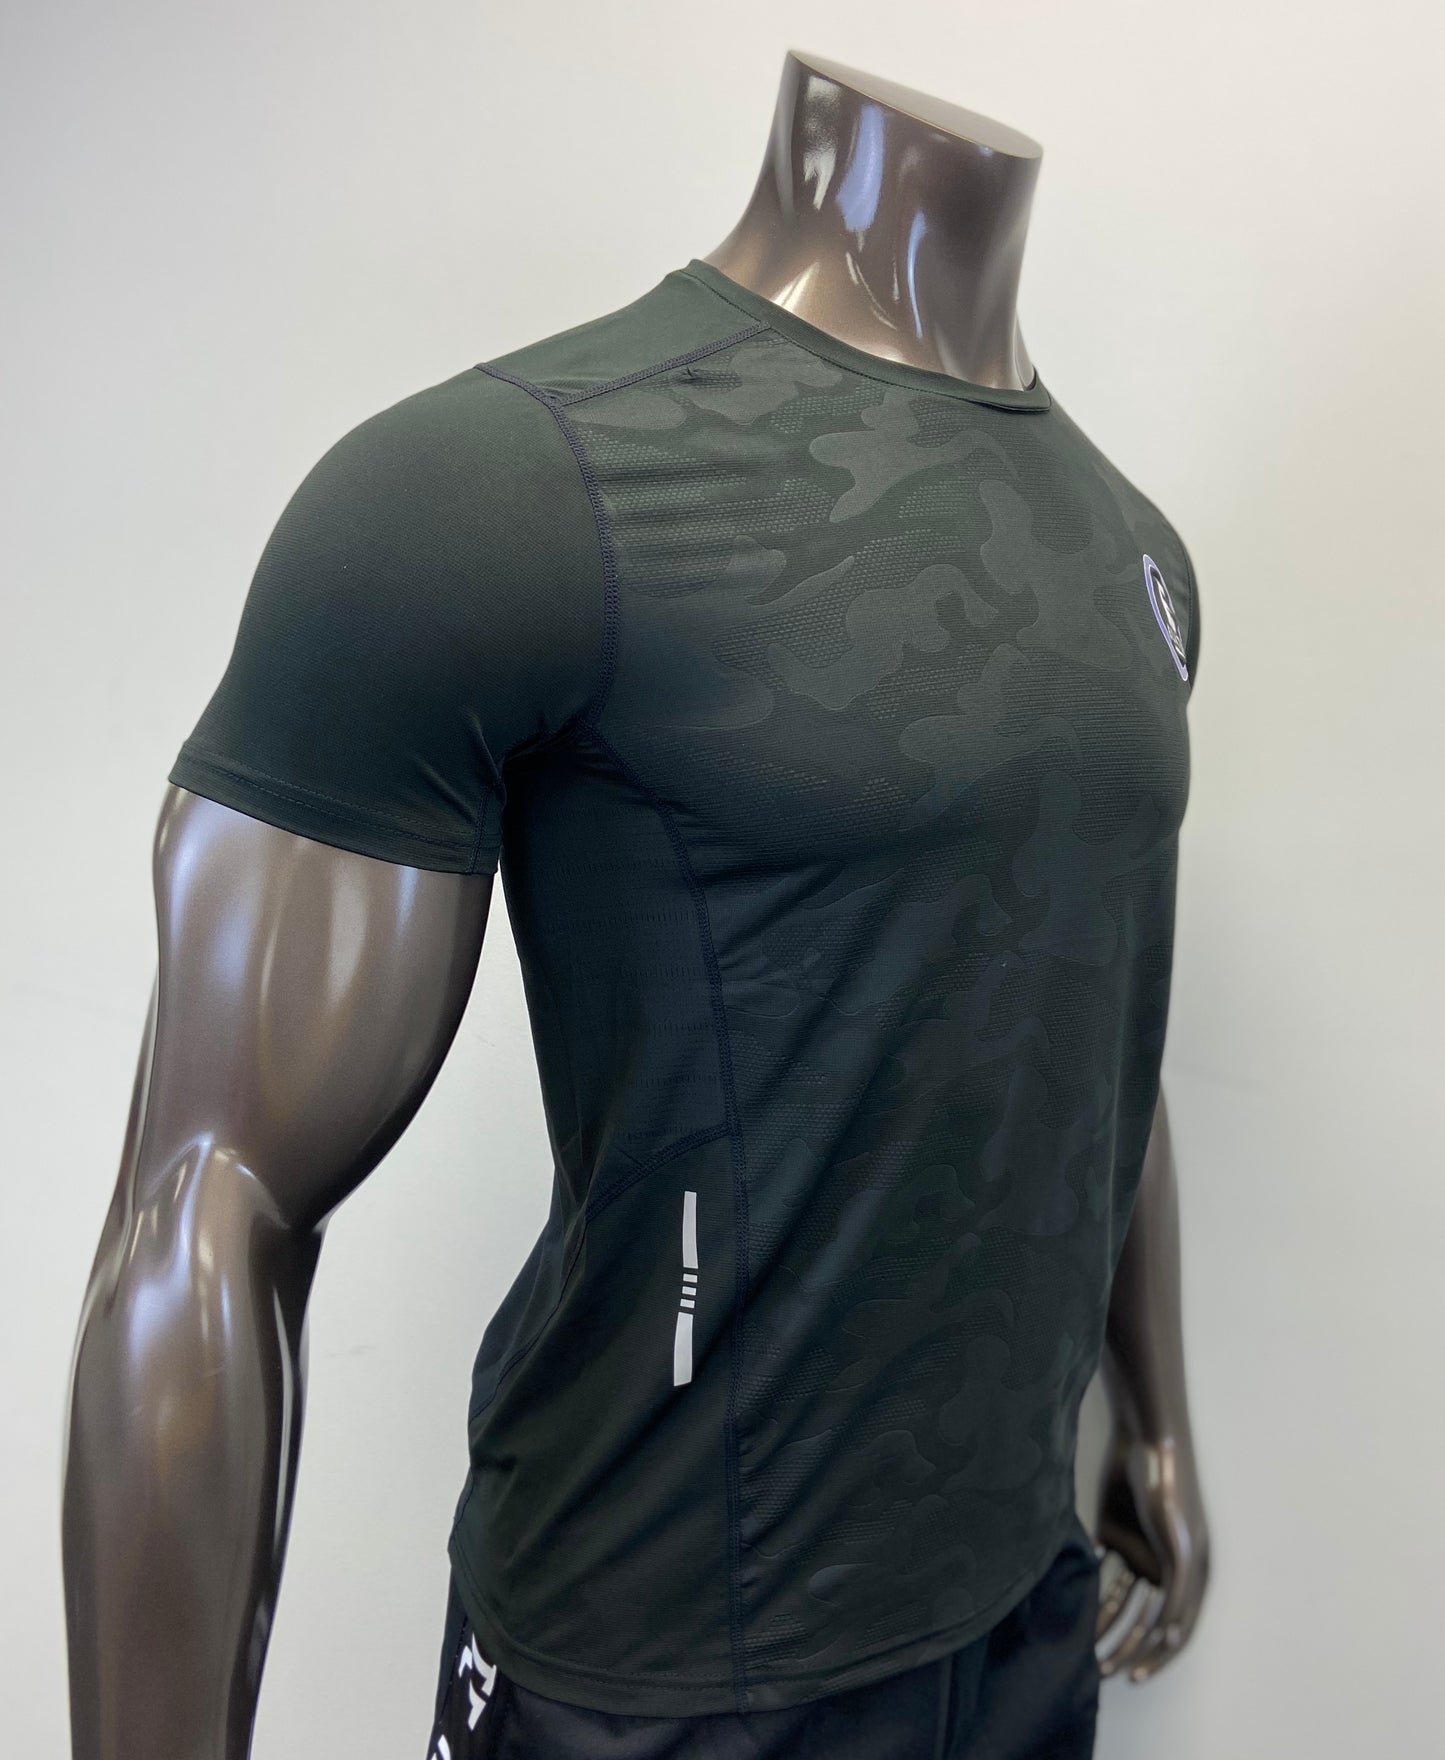 IAEGear™ OFFICIAL Collection Men's Compression Running Athletic Short Sleeve Shirt Camo Black